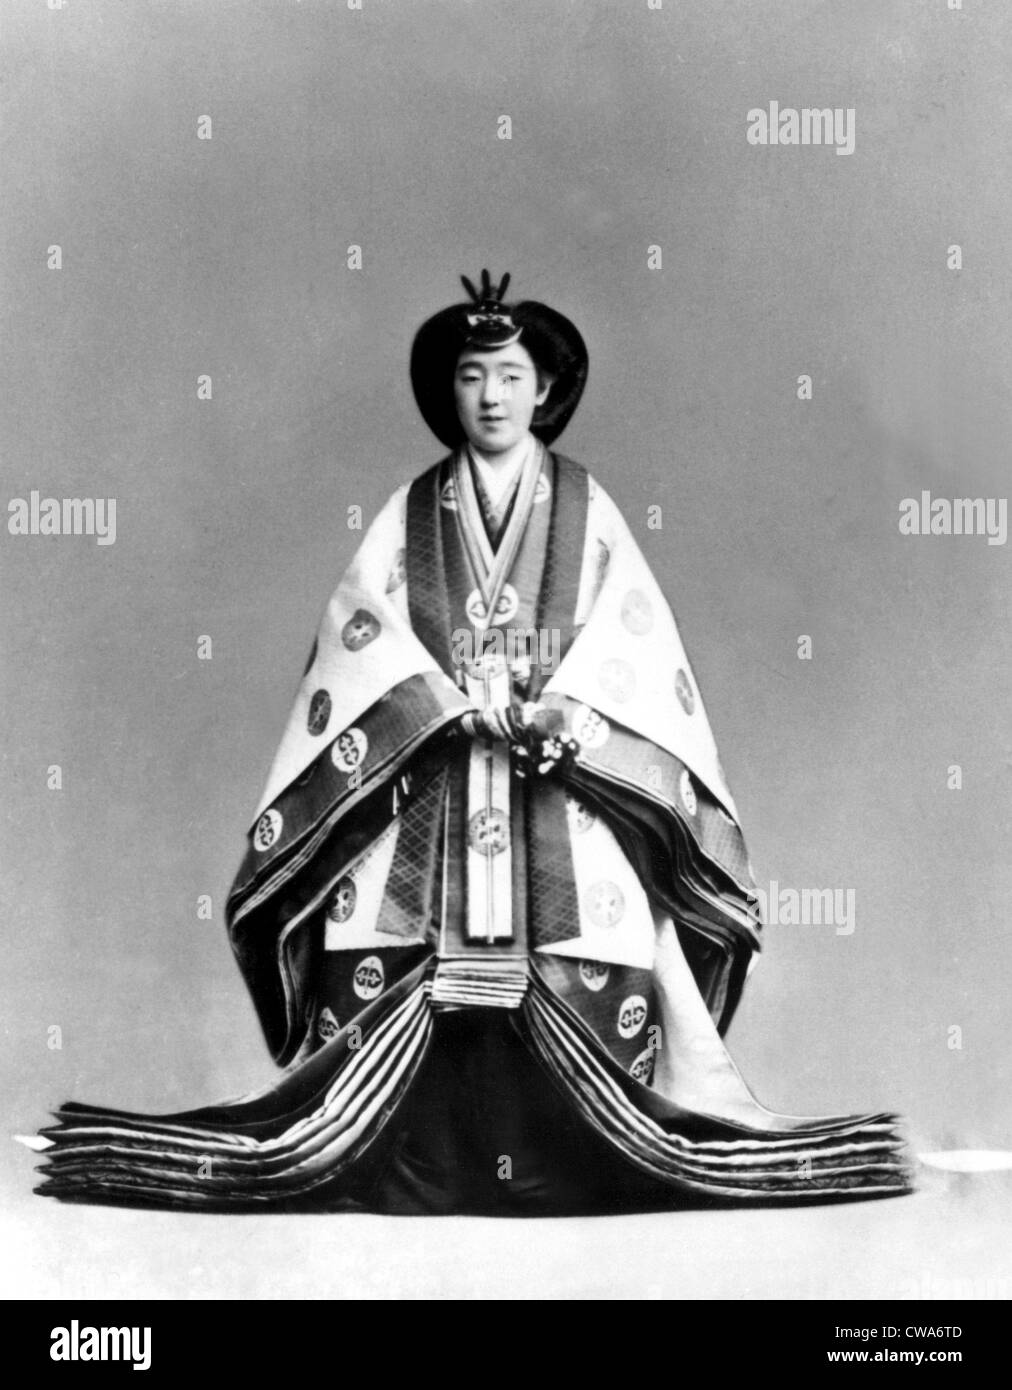 Empress Nagako, wife of Japan's Emperor Hirohito, dressed up for the coronation ceremony in 1928.. Courtesy: CSU Archives / Stock Photo